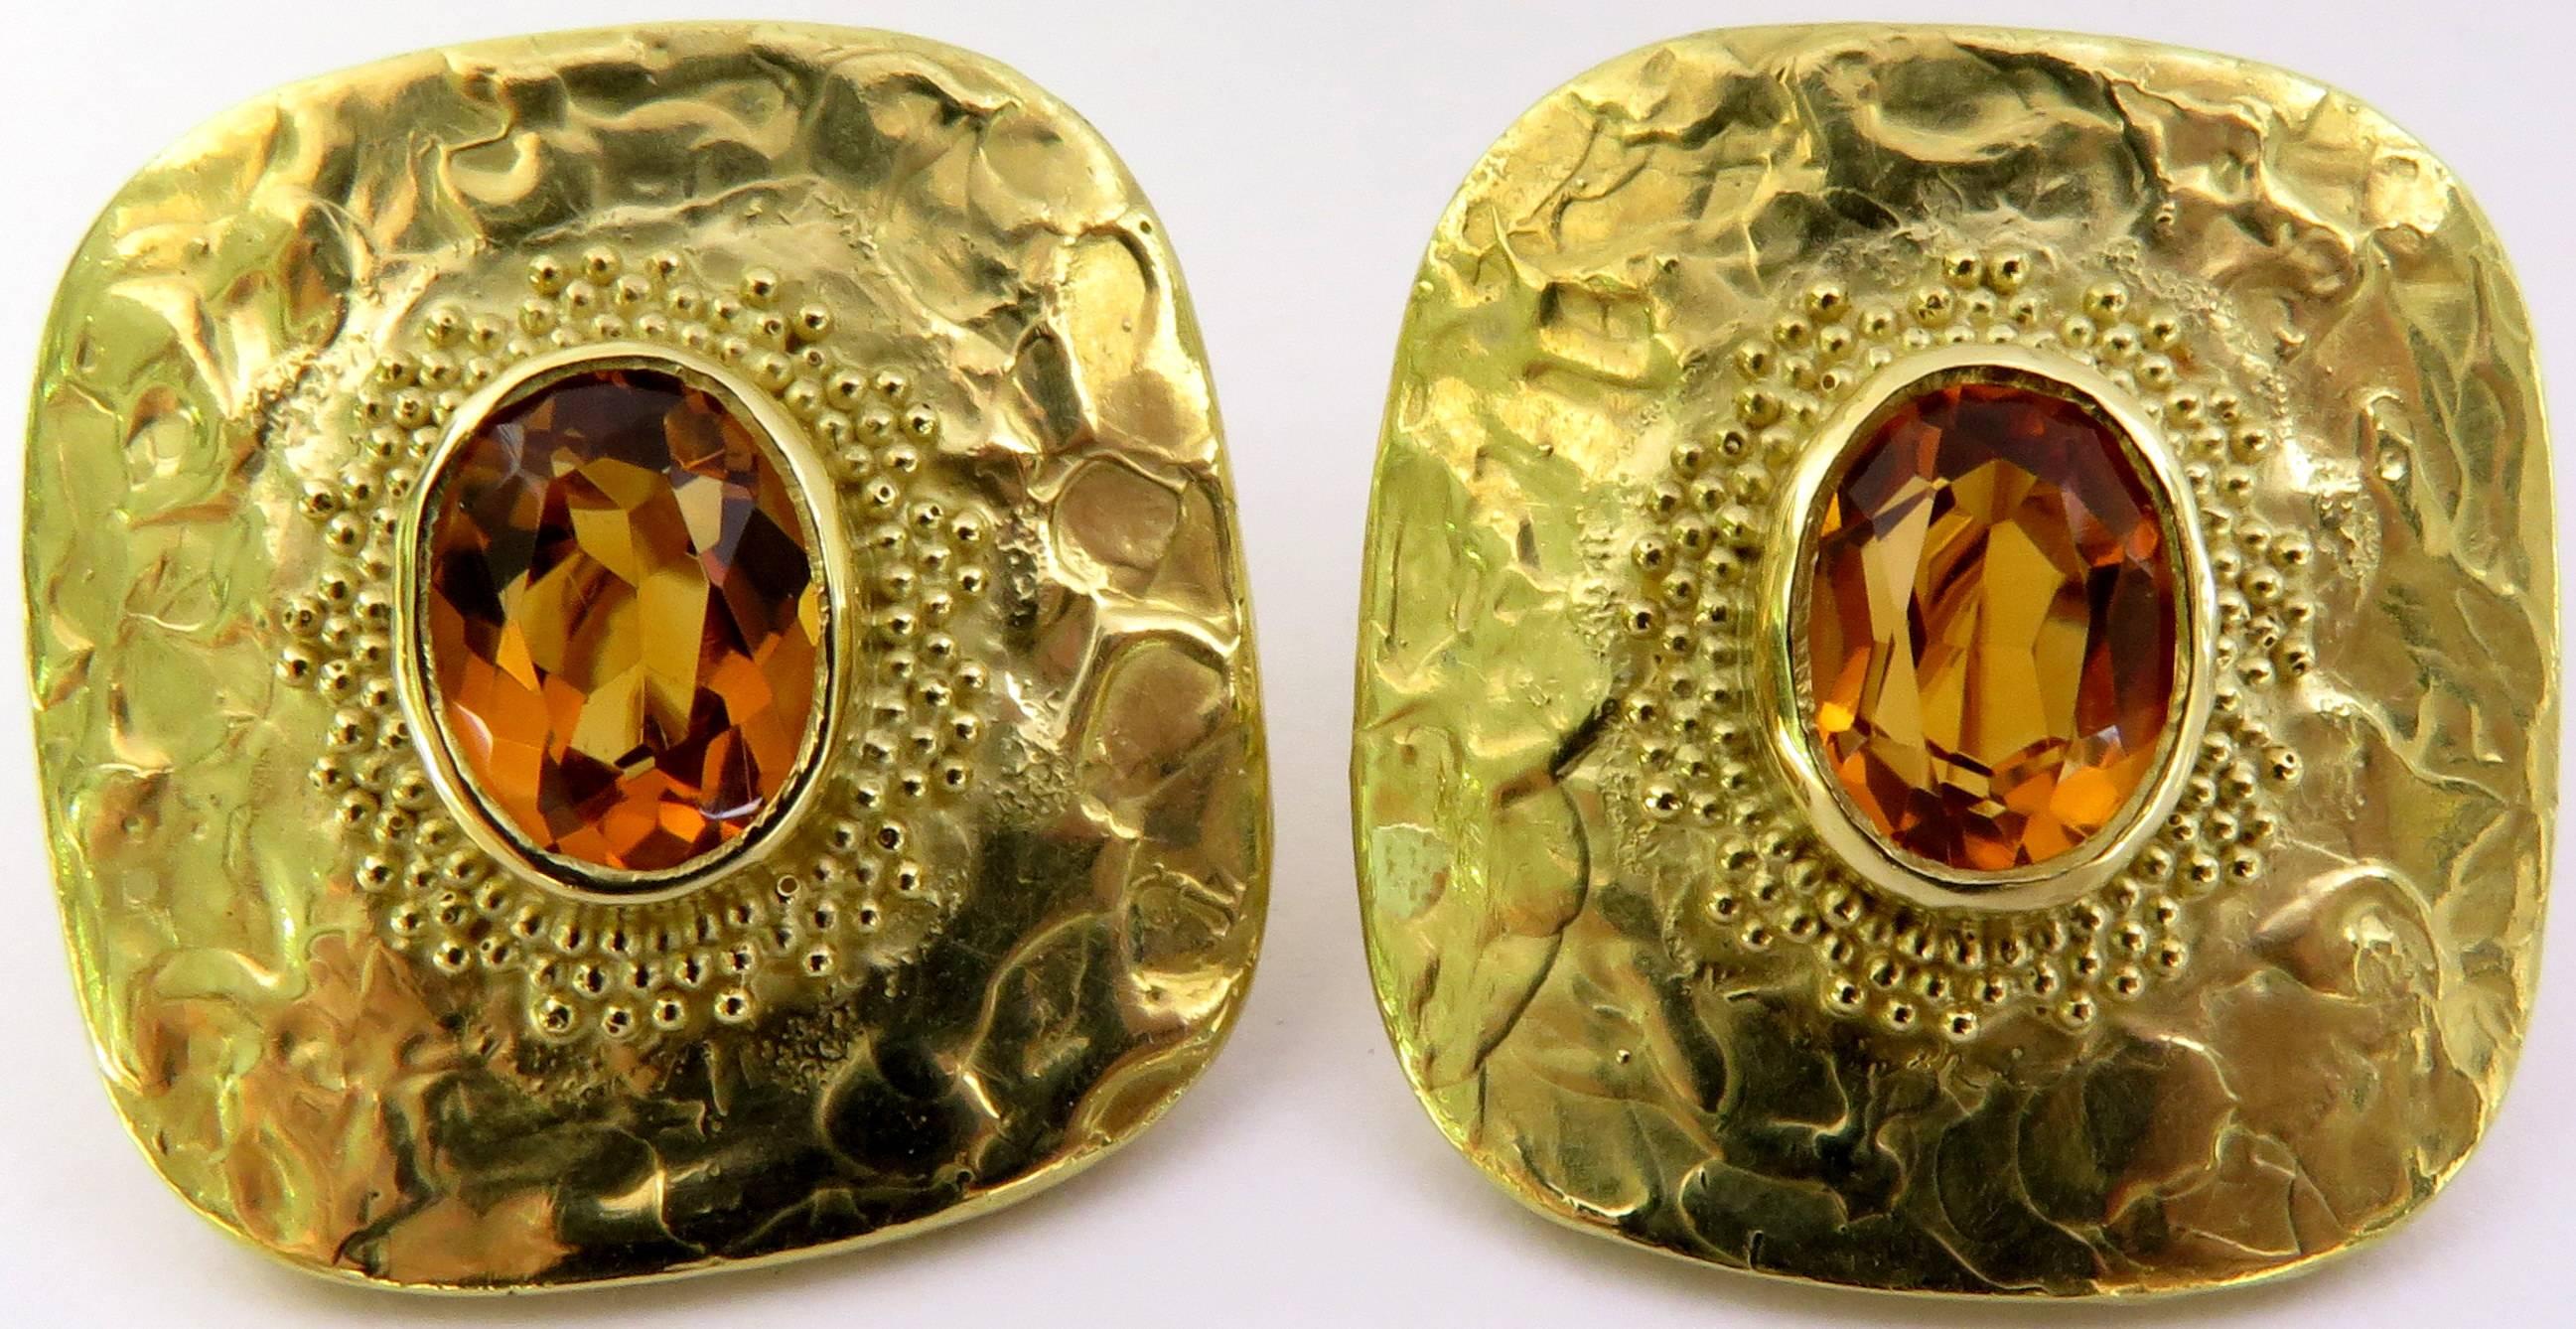 These incredible 18k yellow gold earrings feature an oval shape bezel set topaz sitting atop the earring surrounded by gold Etruscan style beading. They are comfortable to wear and have a clip back that can easily be converted to pierced if desired.